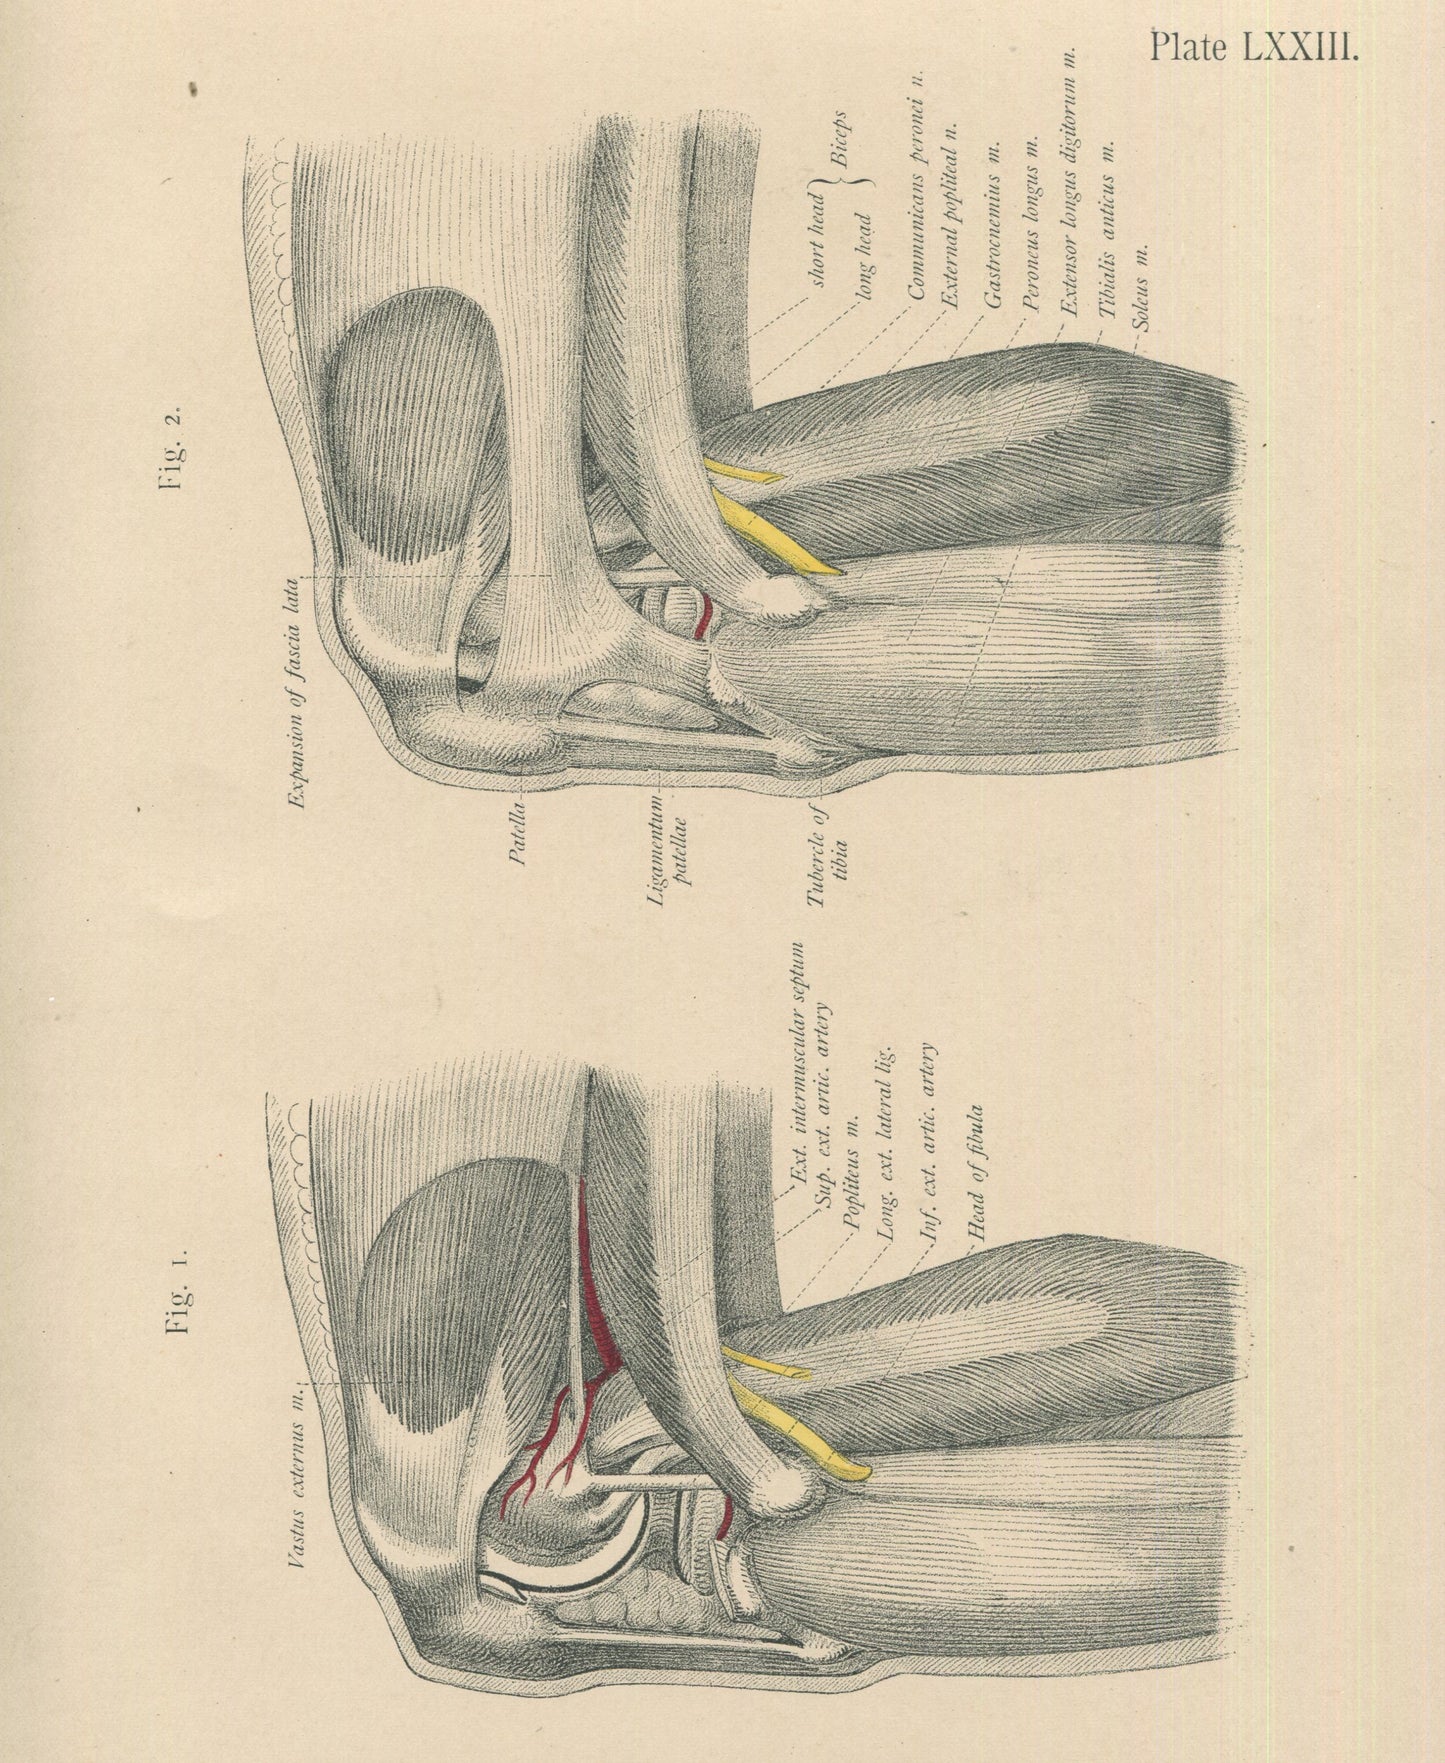 Matted Antique (c.1897) Anatomy Print, Plate LXXIII: The Knee Joint, Outer Side